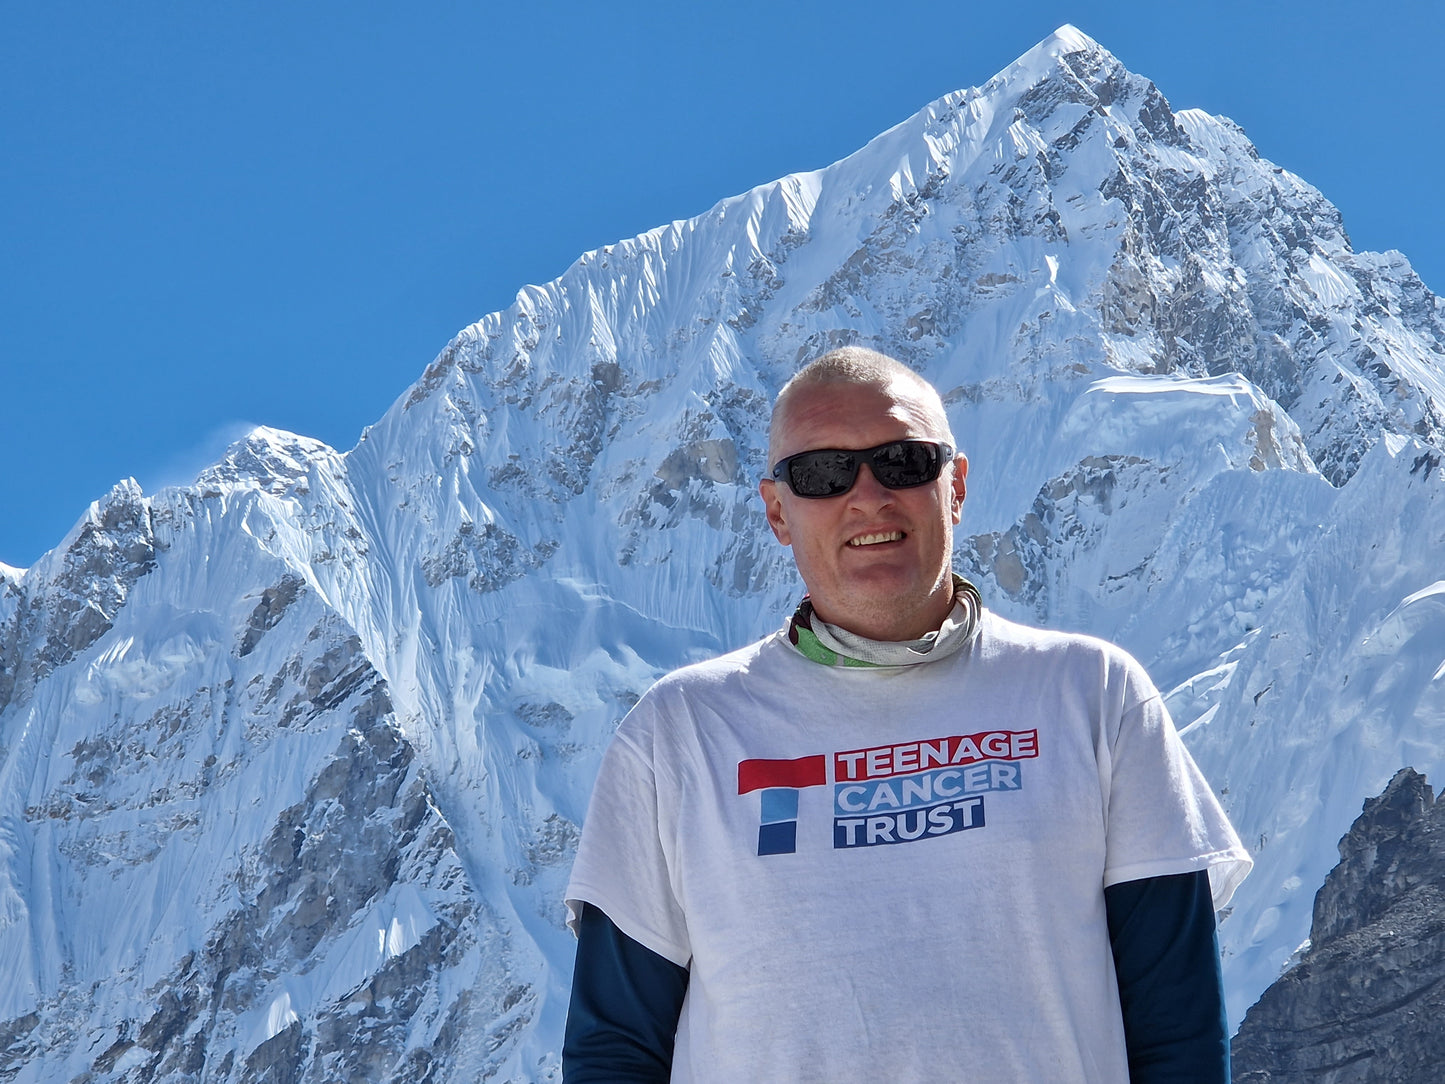 Everest Base Camp - How I trained for and trekked to the bottom of the highest mountain in the world.